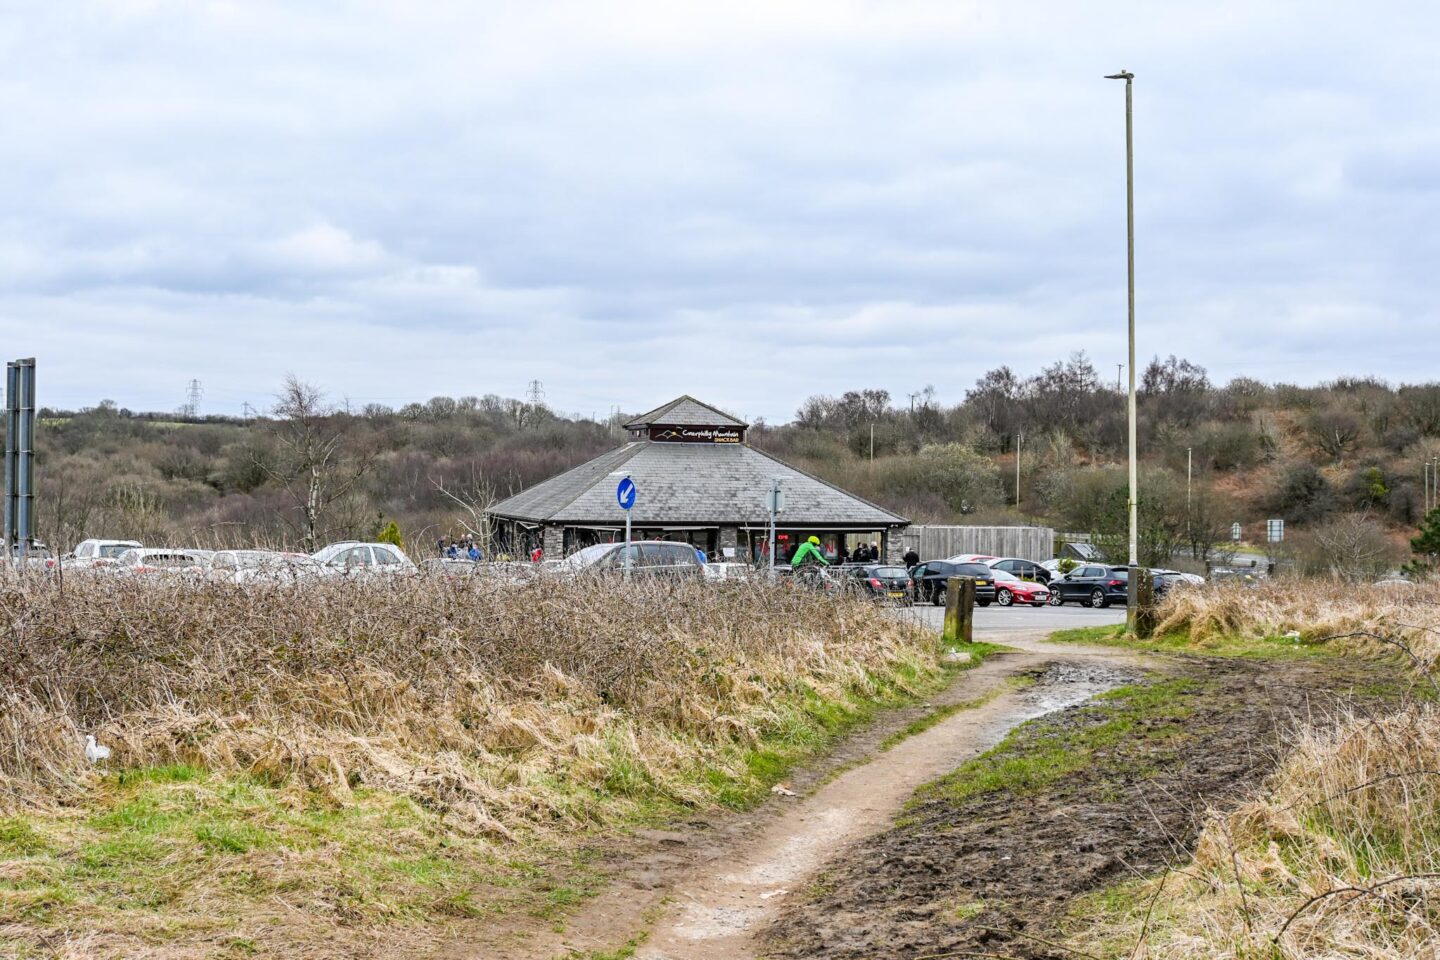 Caerphilly Mountain Snack Bar and Parking